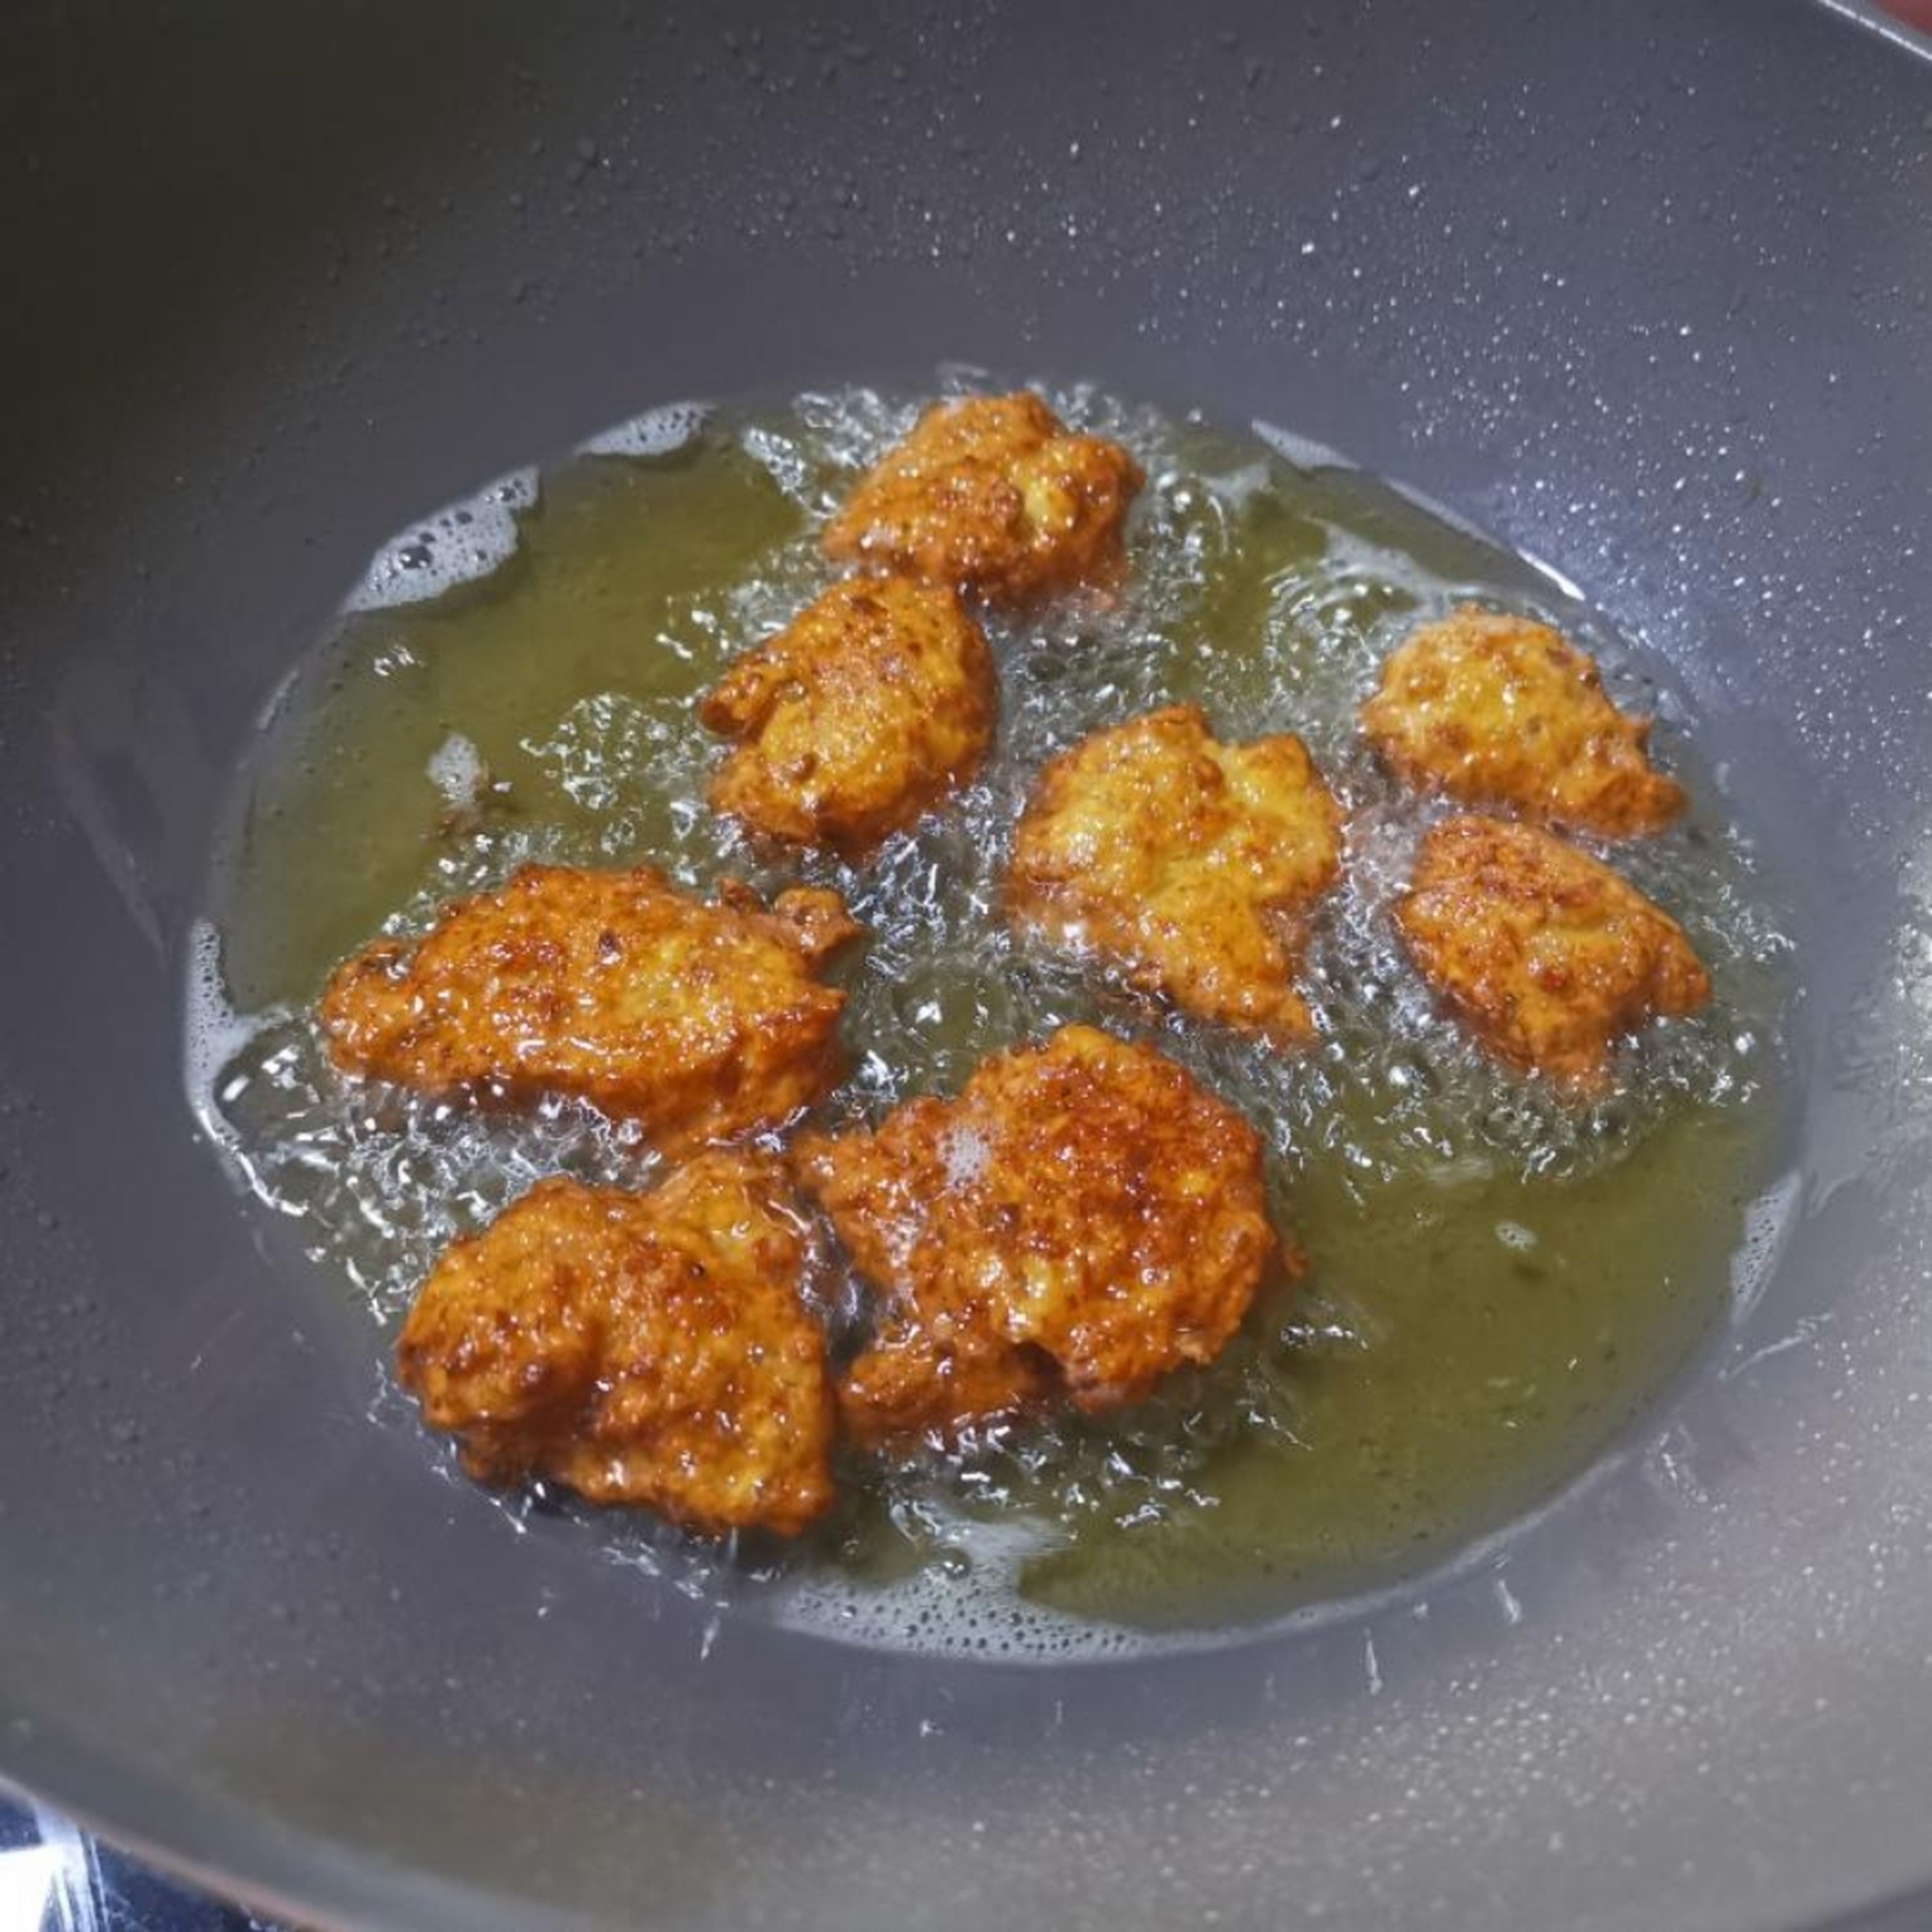 10. Scoop out the fried meat balls and place in plaid laid with kitchen towel to drain off excess oil.